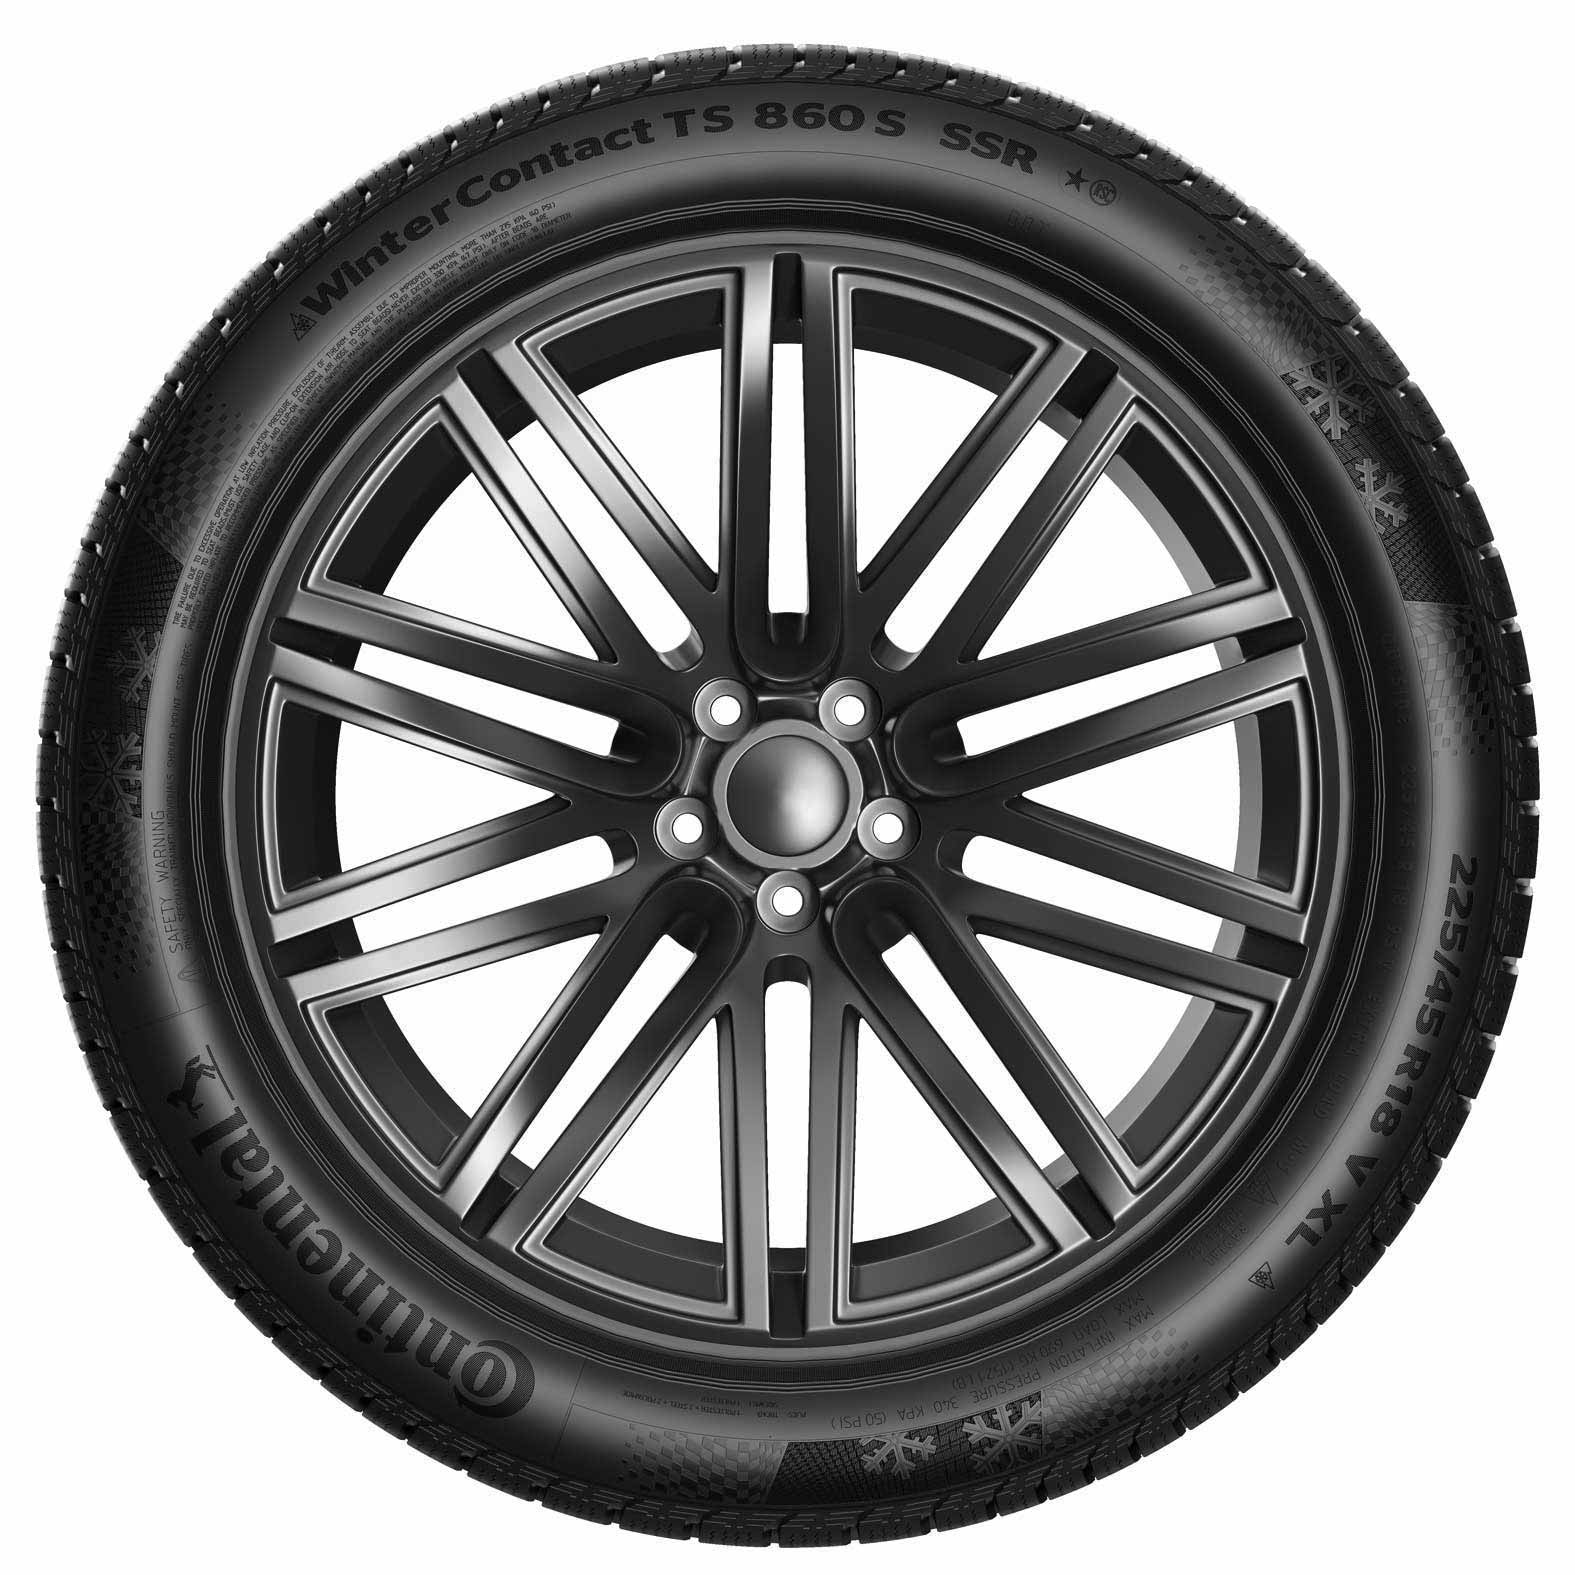 for S TS860 Kal | Tire Tires WinterContact Winter Continental